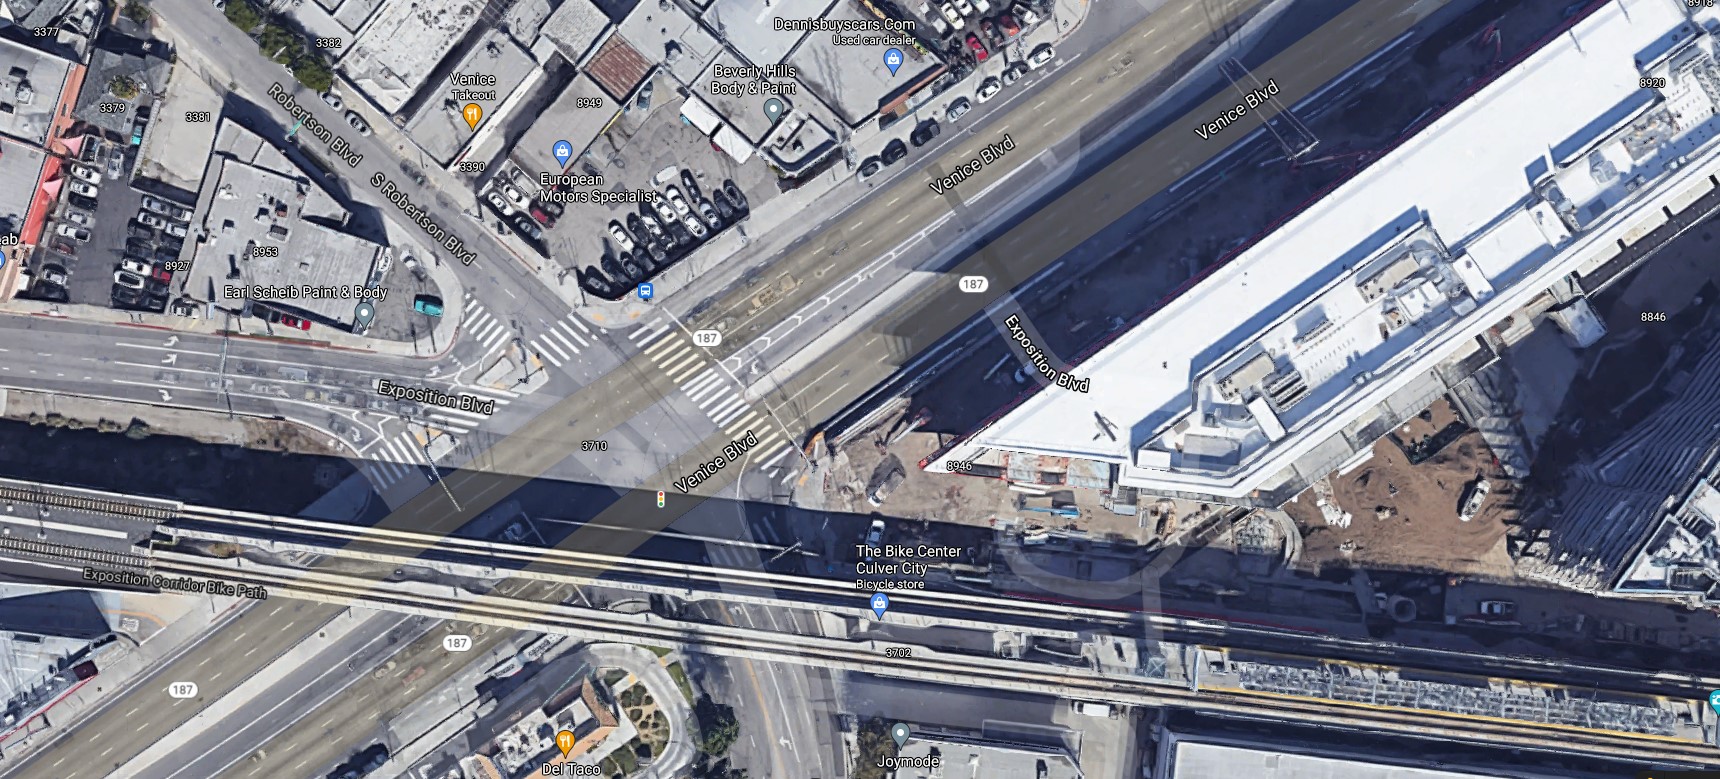 Five-way intersection at Venice/Robertson/Exposition - via Google Maps